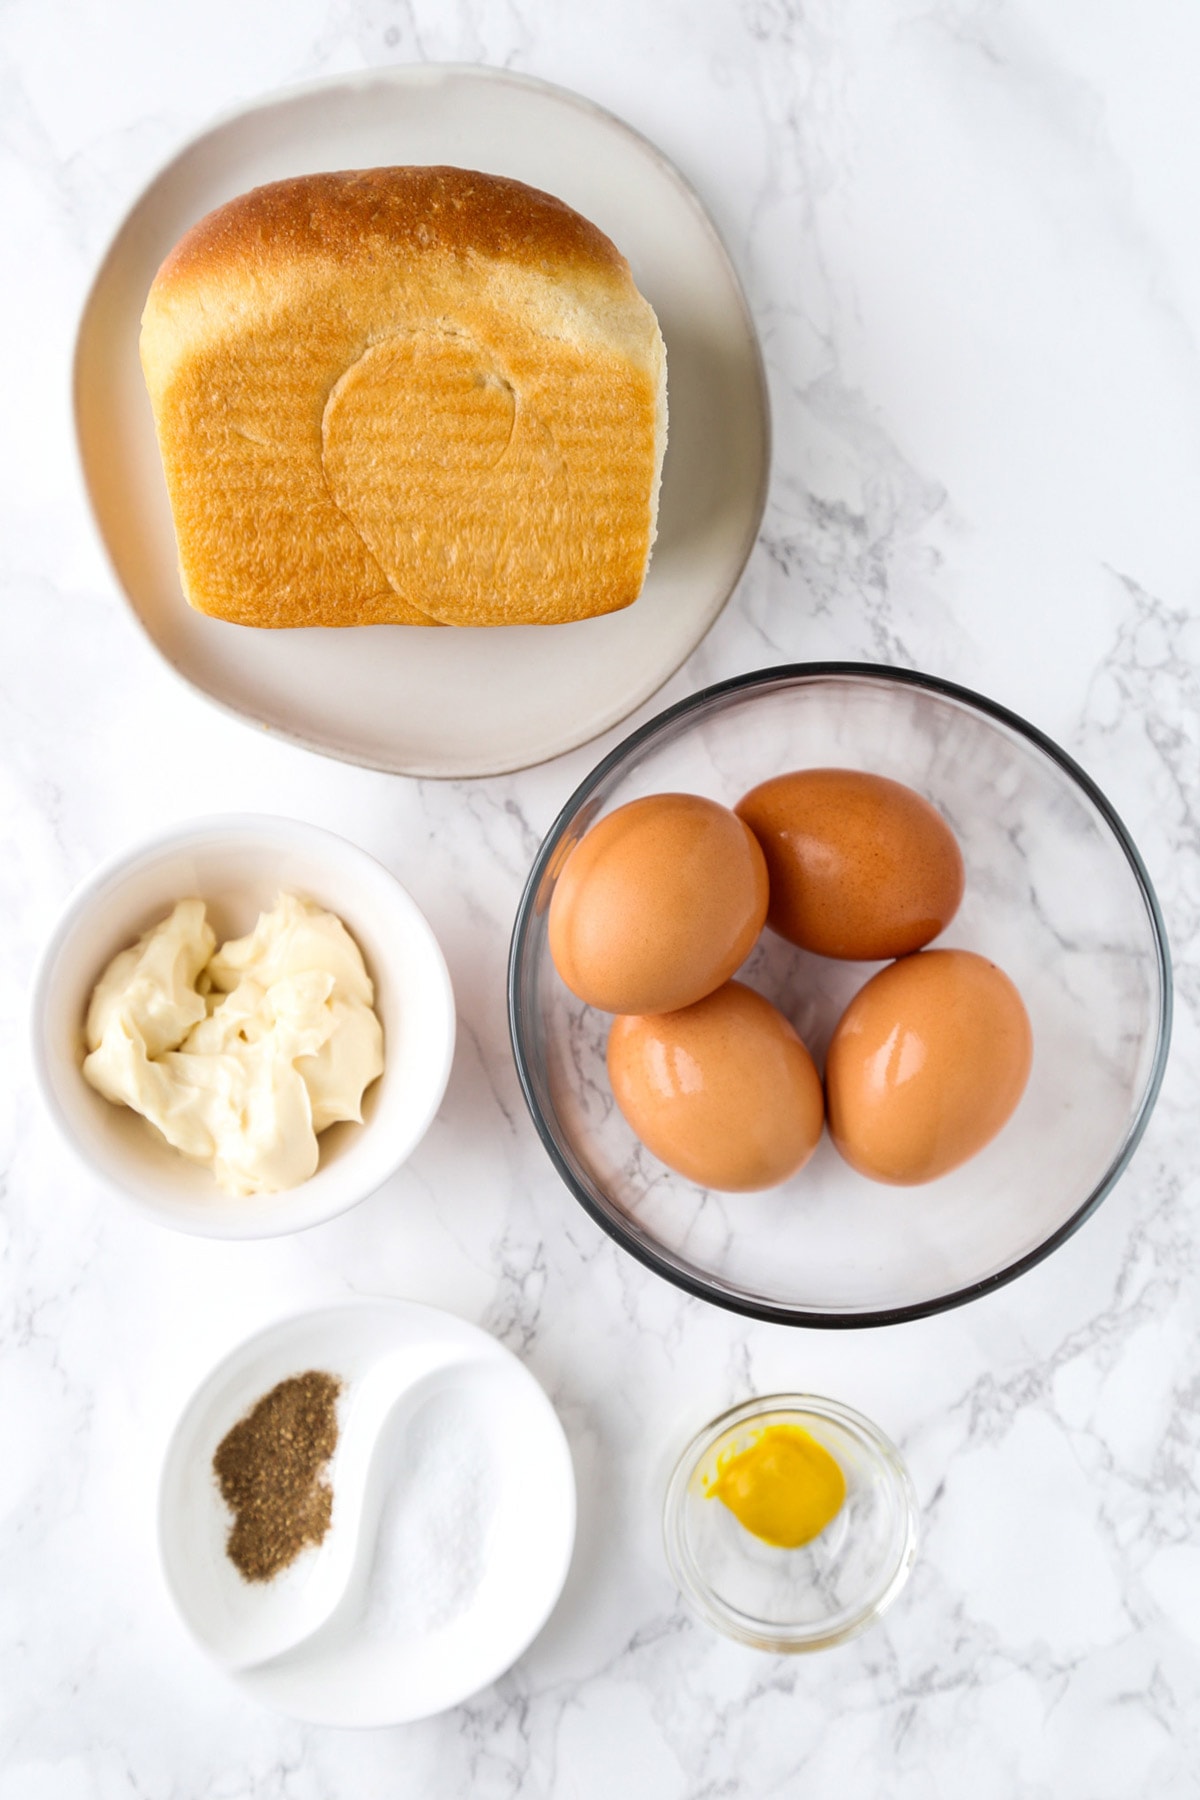 Ingredients for Japanese Egg Sandwich